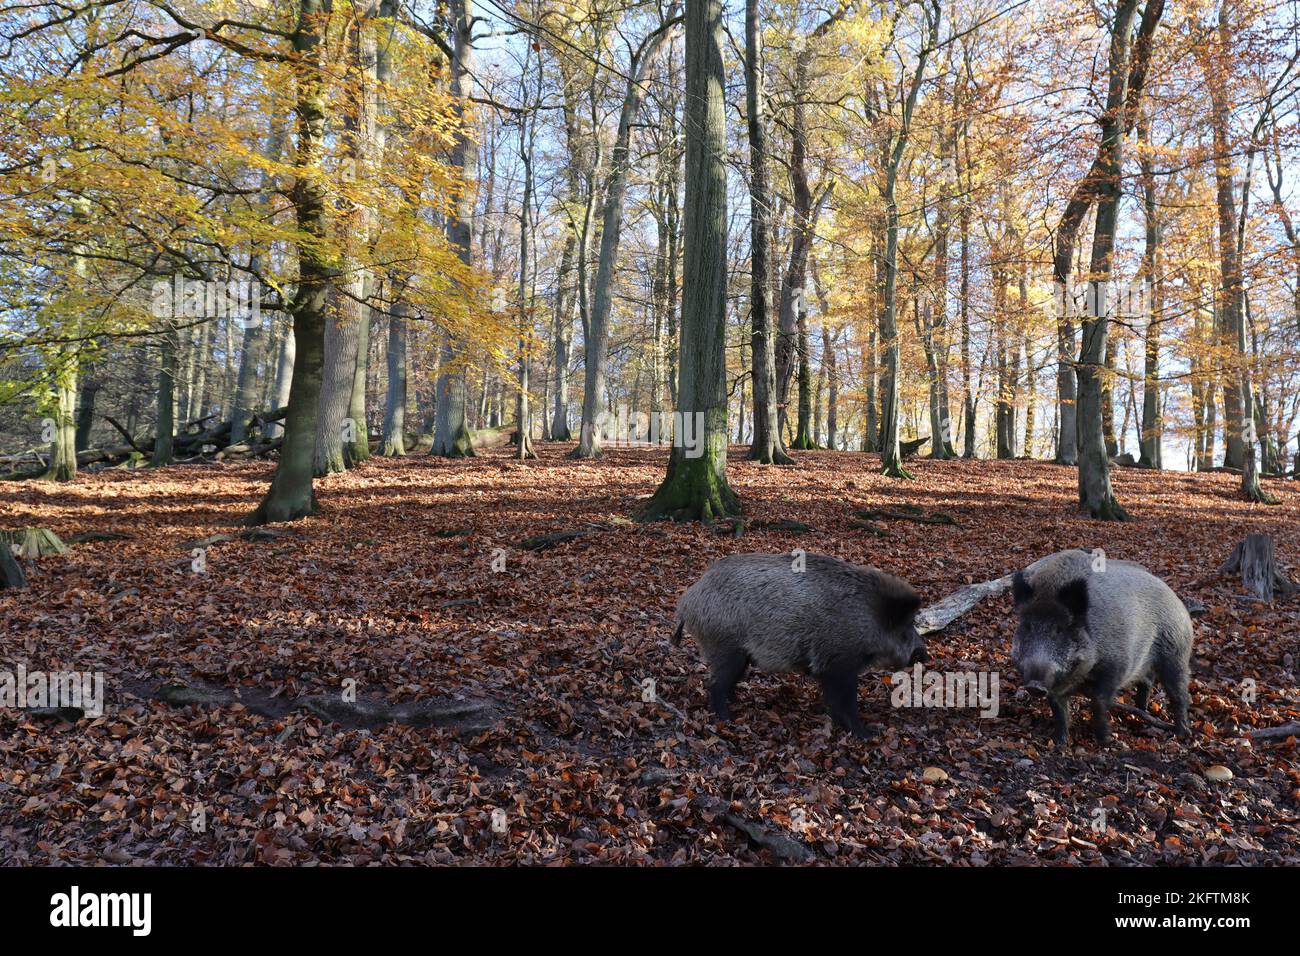 Light-flooded autumnal forest with two wild boars in the foreground Stock Photo